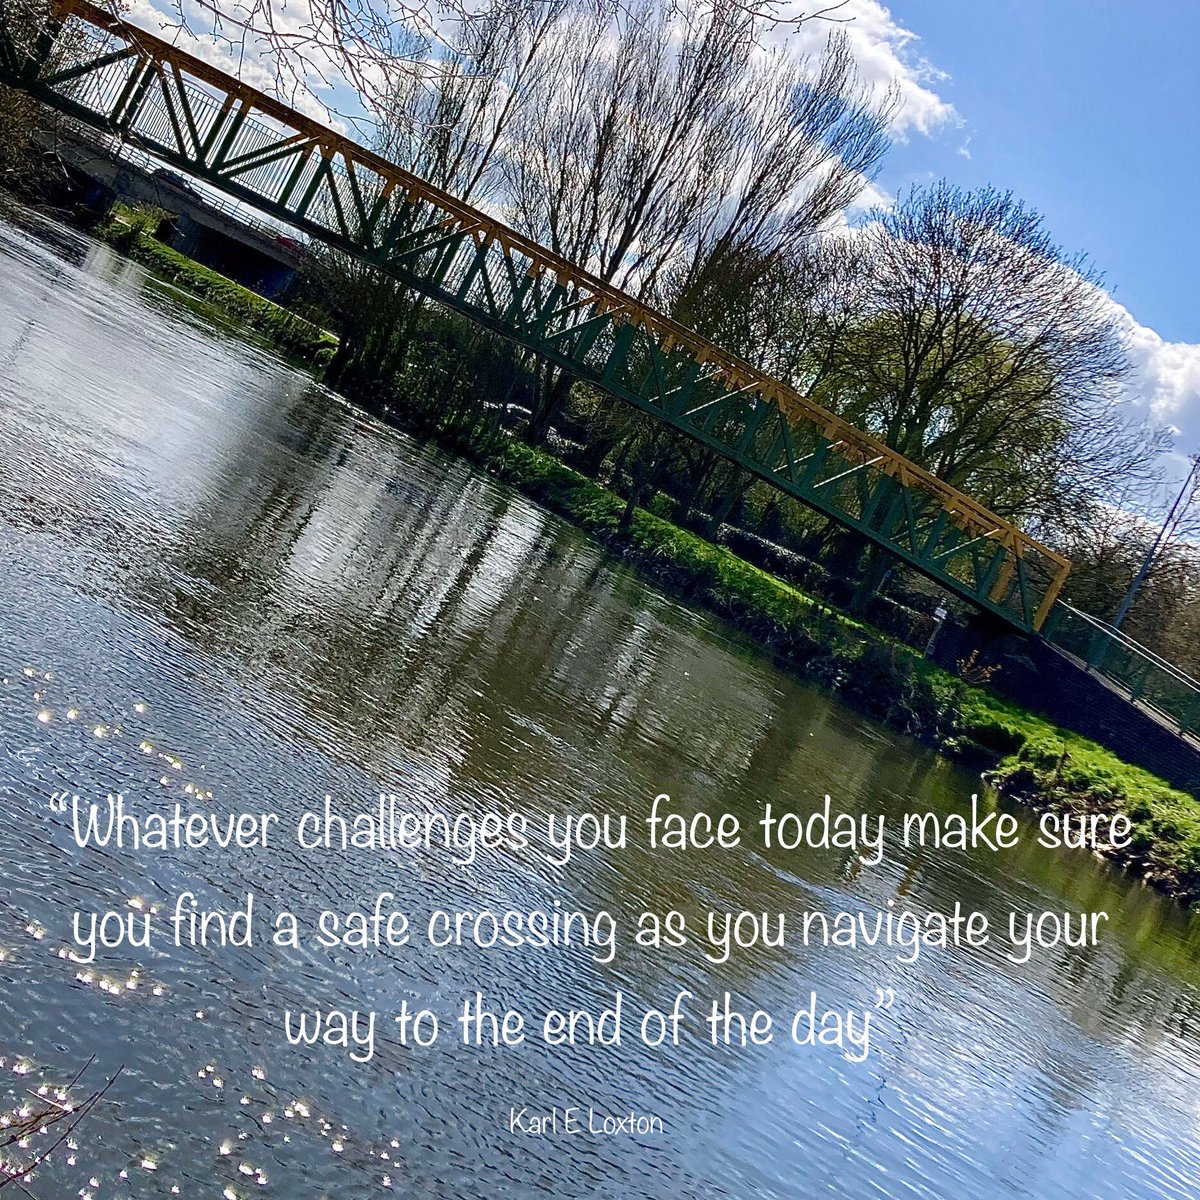 “Whatever challenges you face today make sure you find a safe crossing as you navigate your way to the end of the day” Take care and travel safe peeps x #SafeCrossing #TravelSafe #quotesaboutlife #quotes